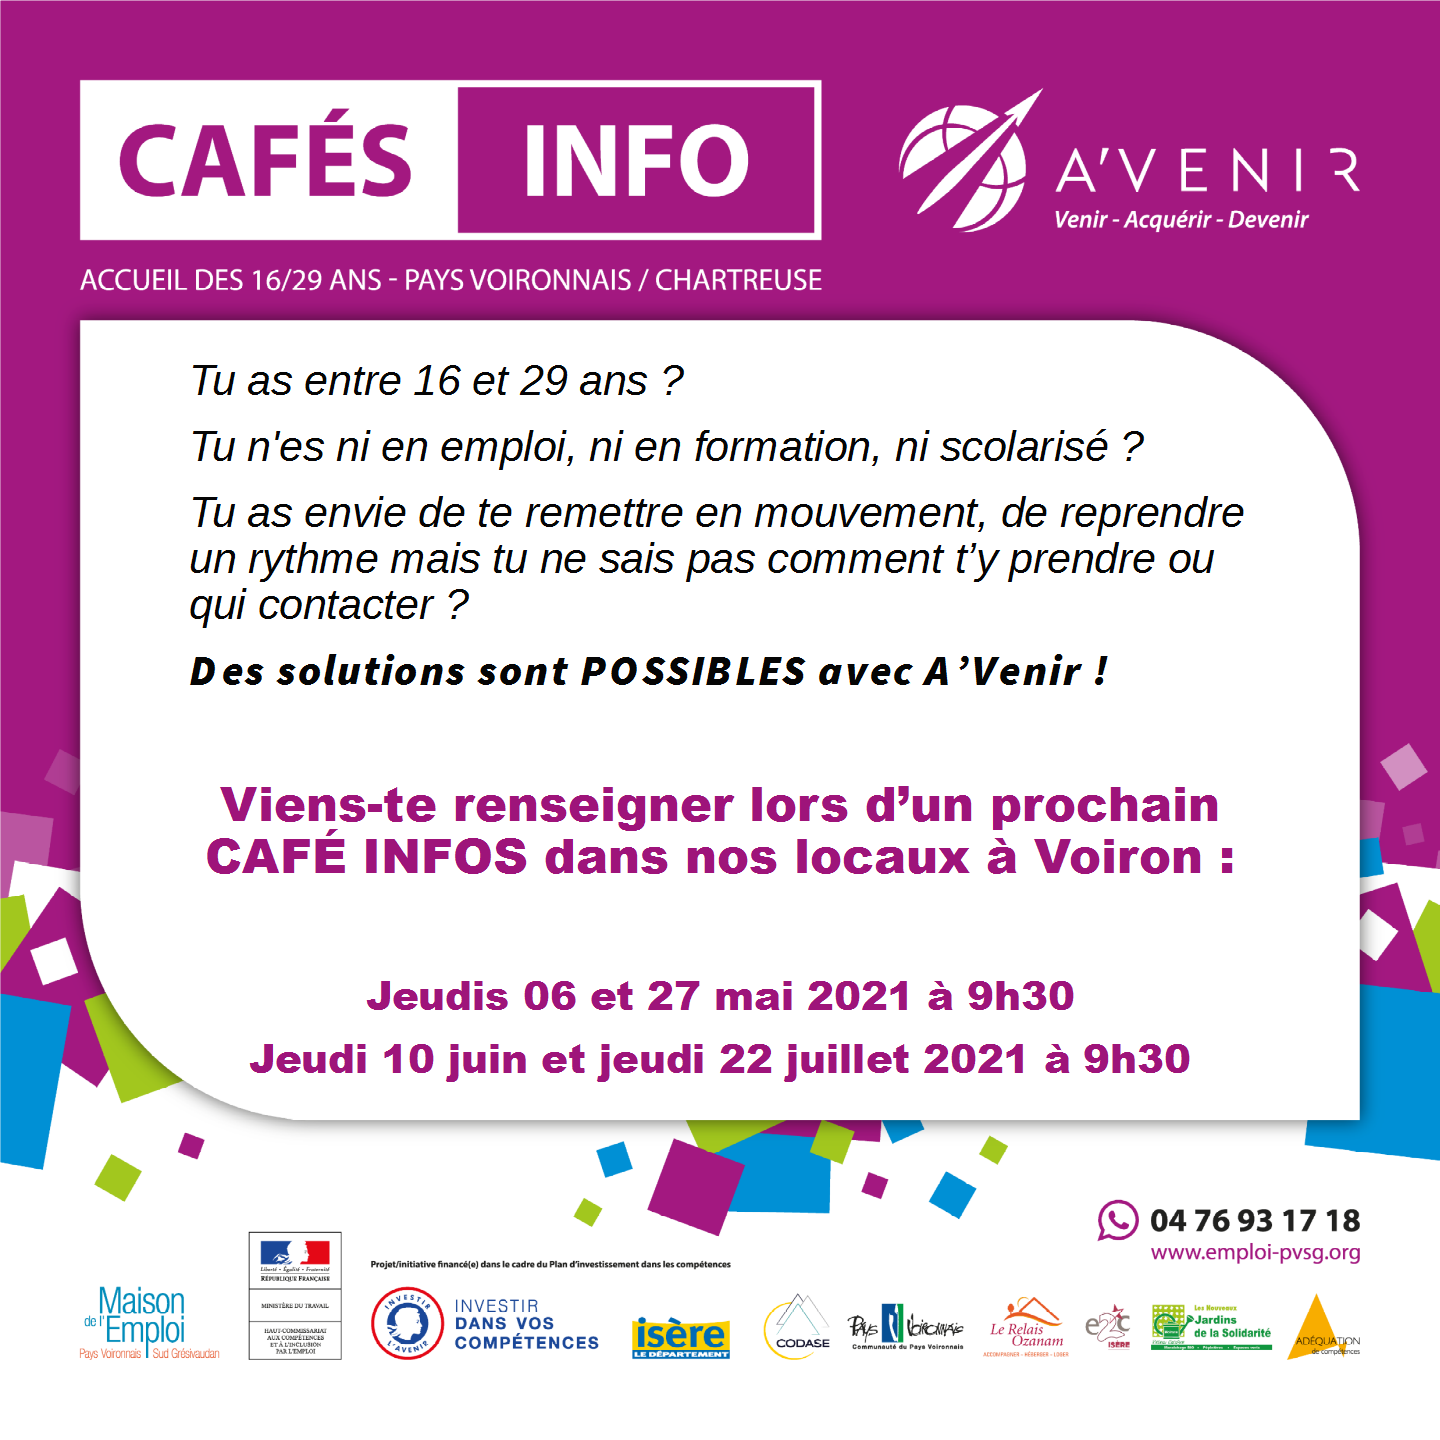 8 post cafes infos